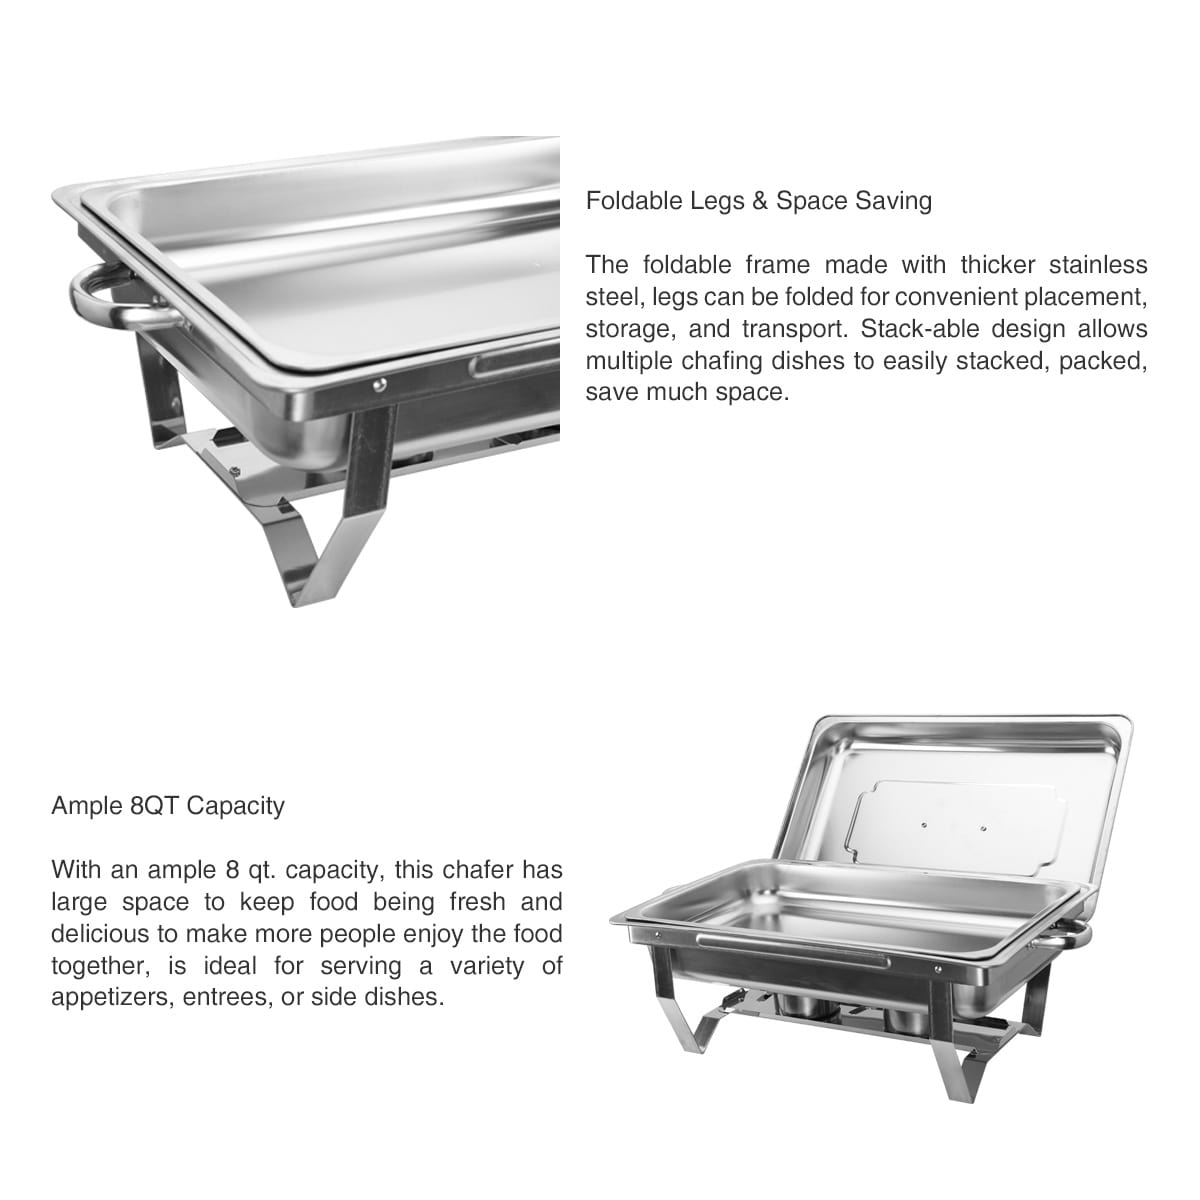 Stainless-Steel-Catering-Food-Warmer